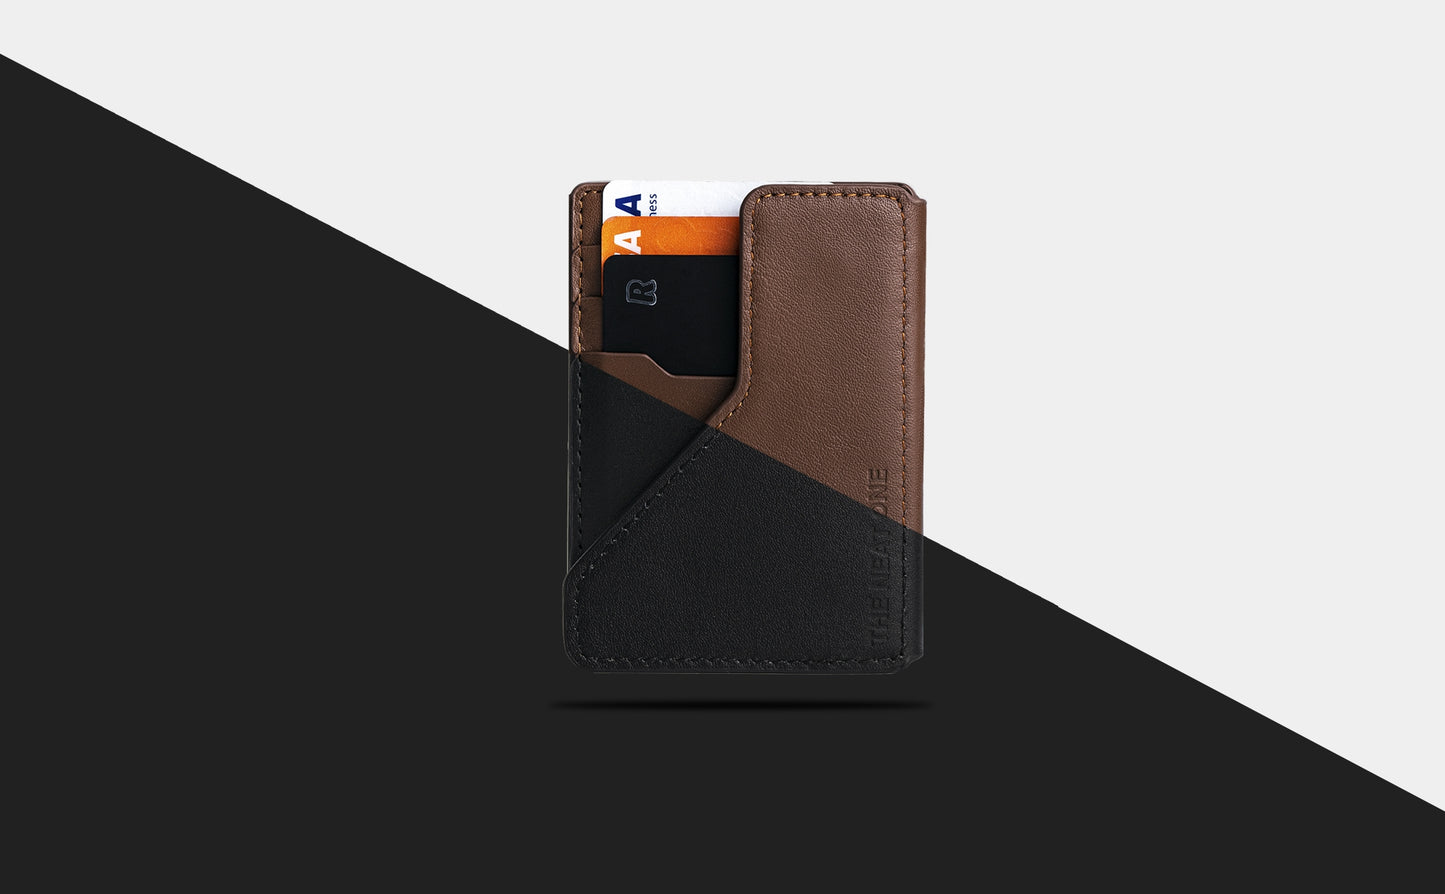 The Neat One Wallet